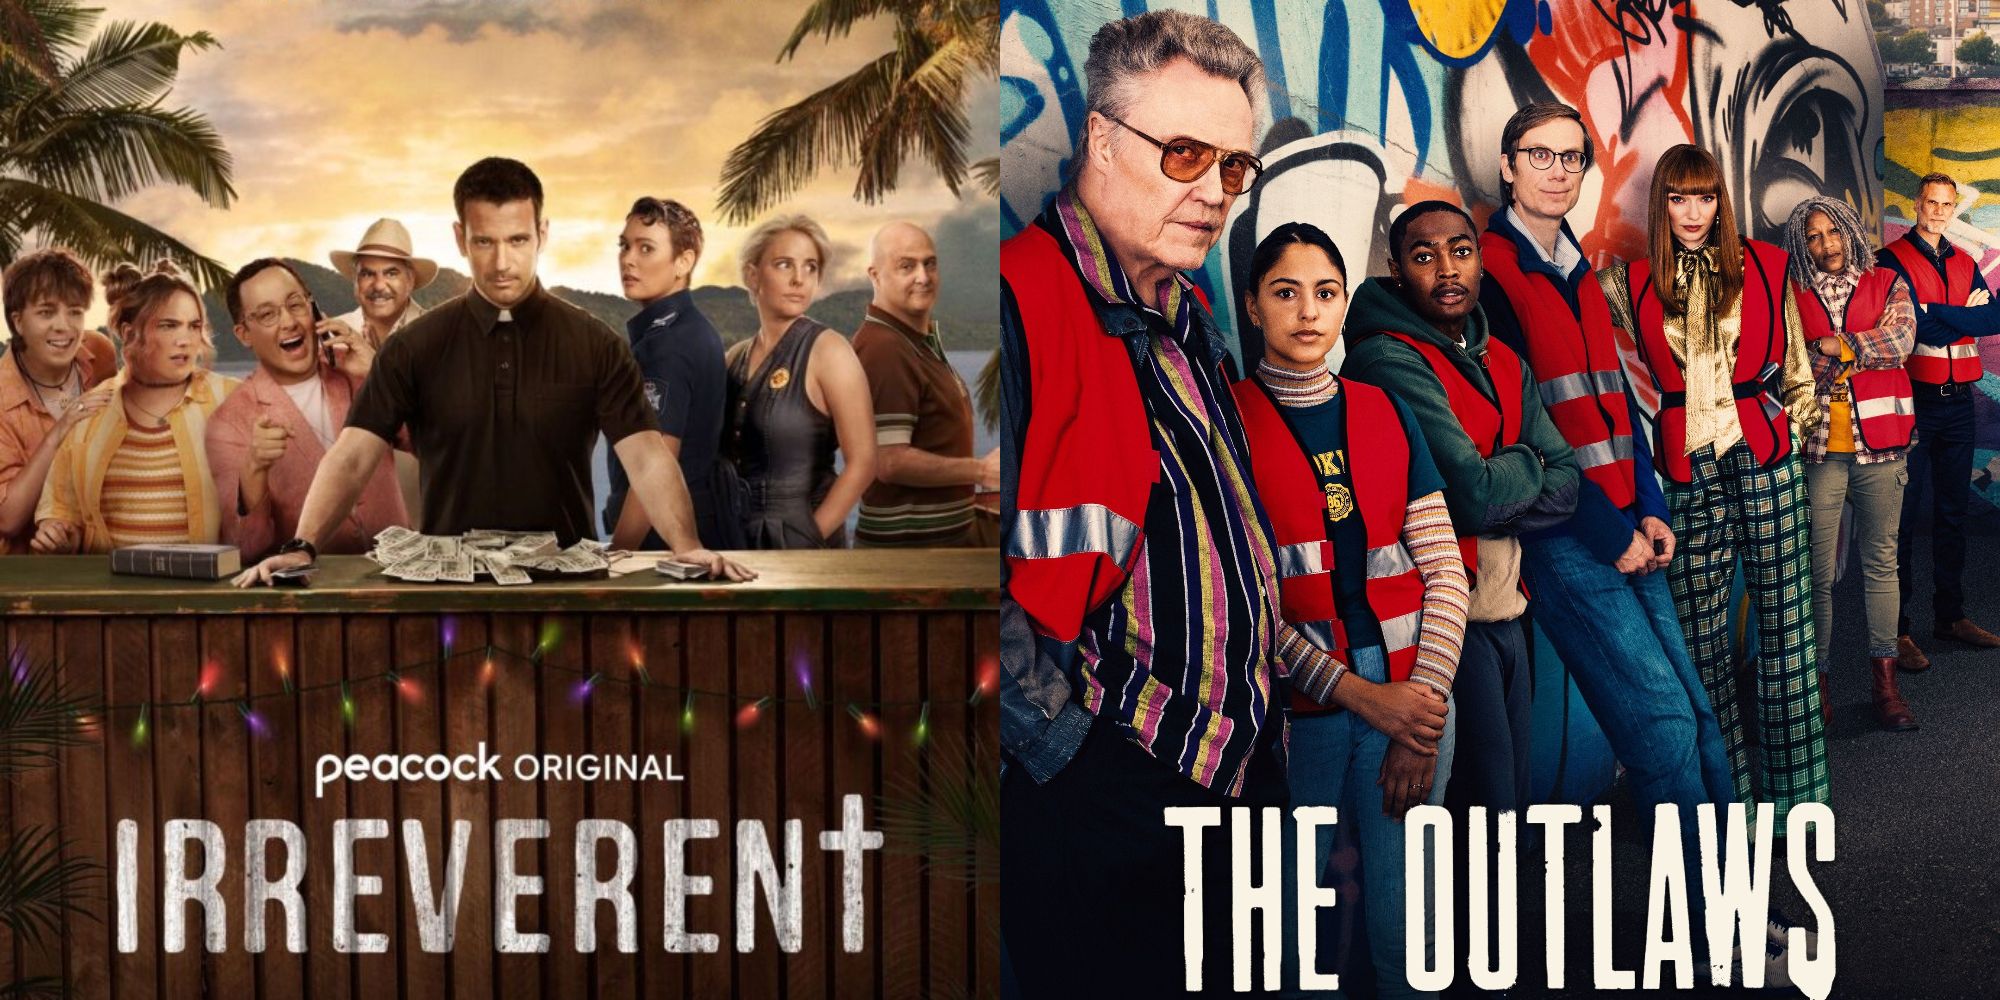 Split image showing posters for Irreverent and The Outlaws